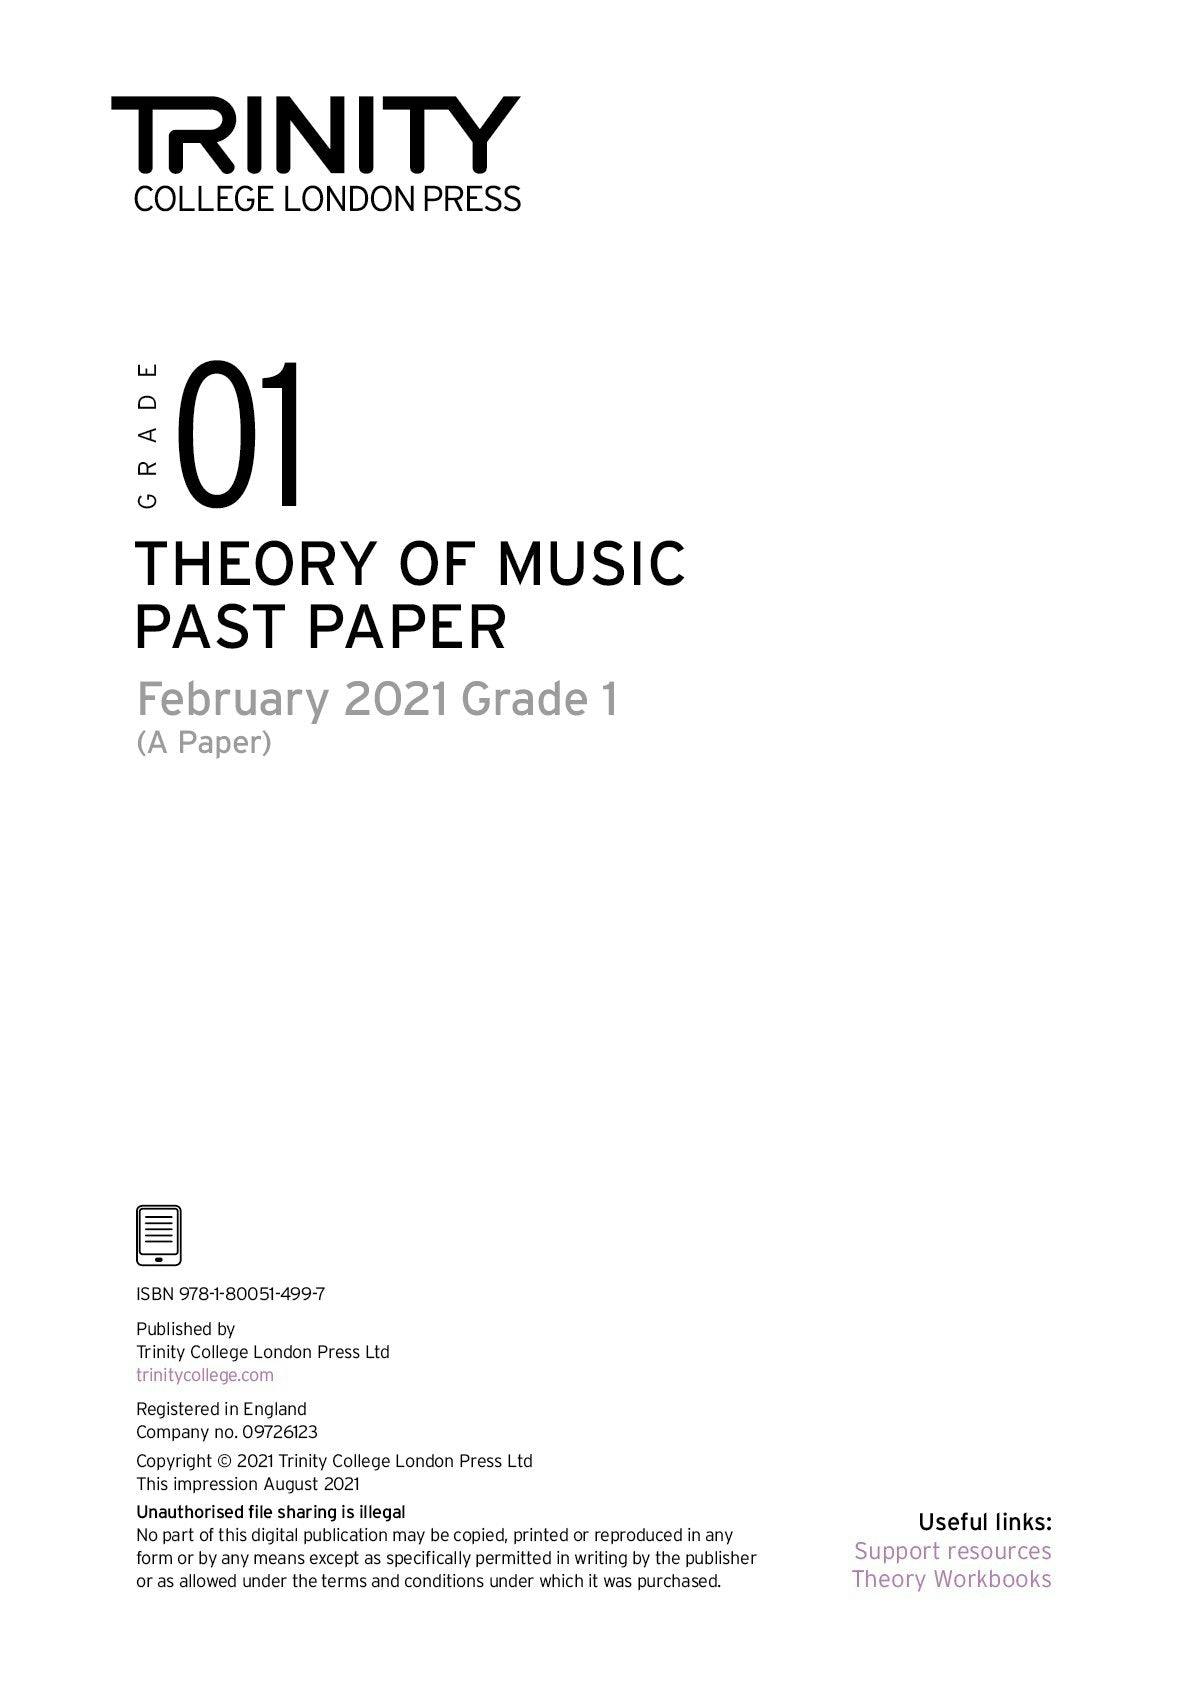 Theory of Music Past Paper 2021 Feb A: Grade 1 - ebook